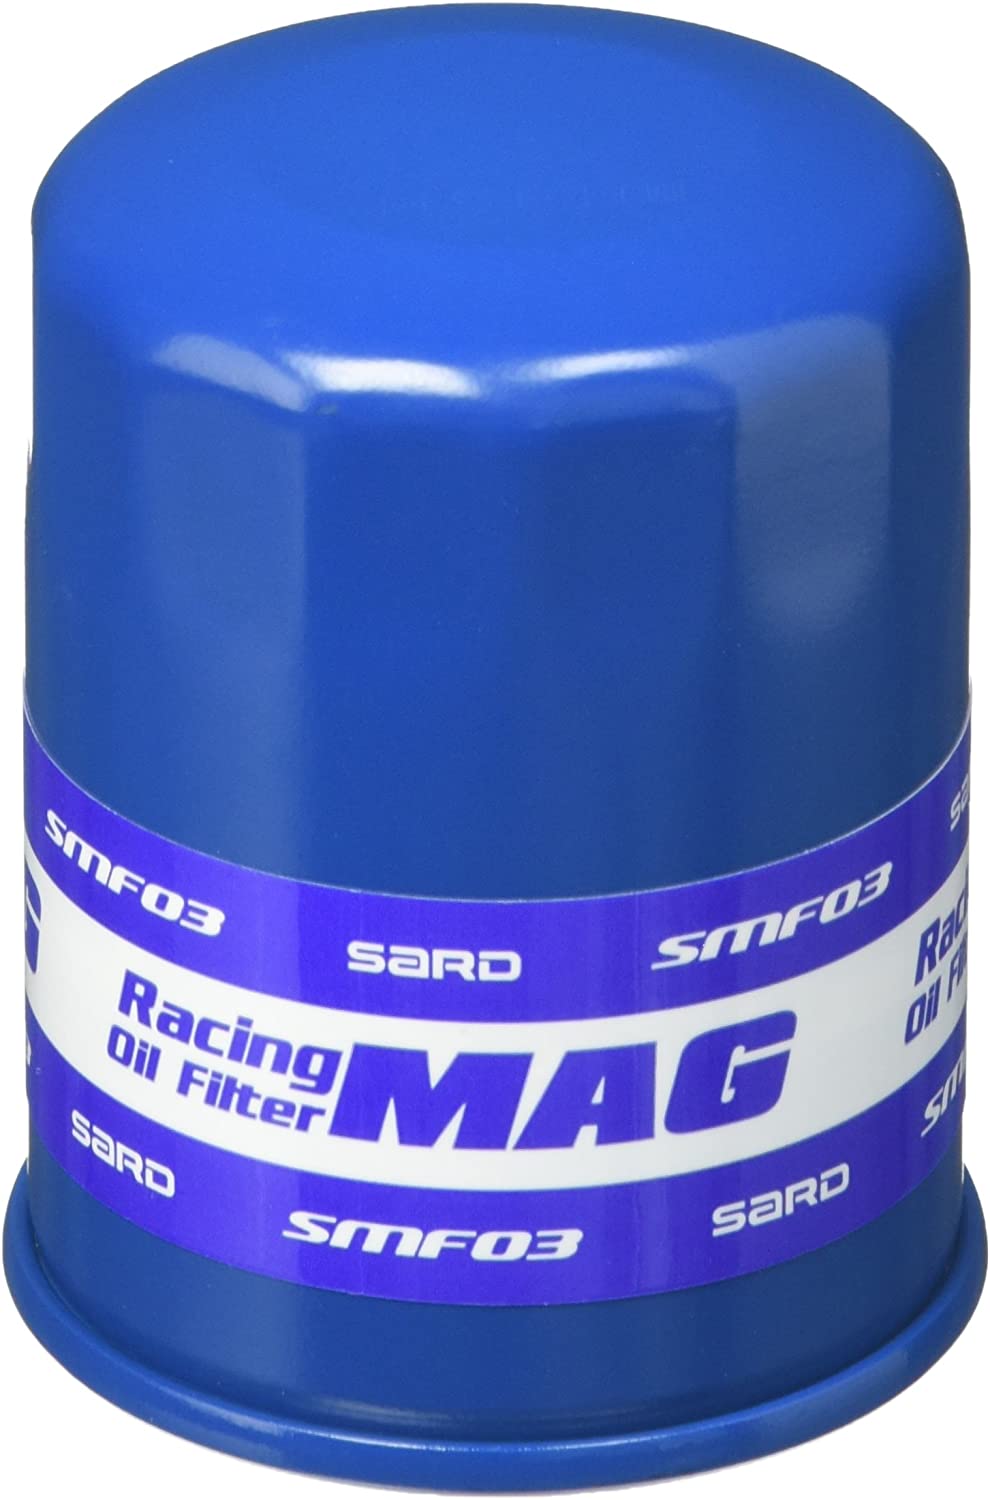 SARD RACING OIL FILTER For STAGEA SMF00